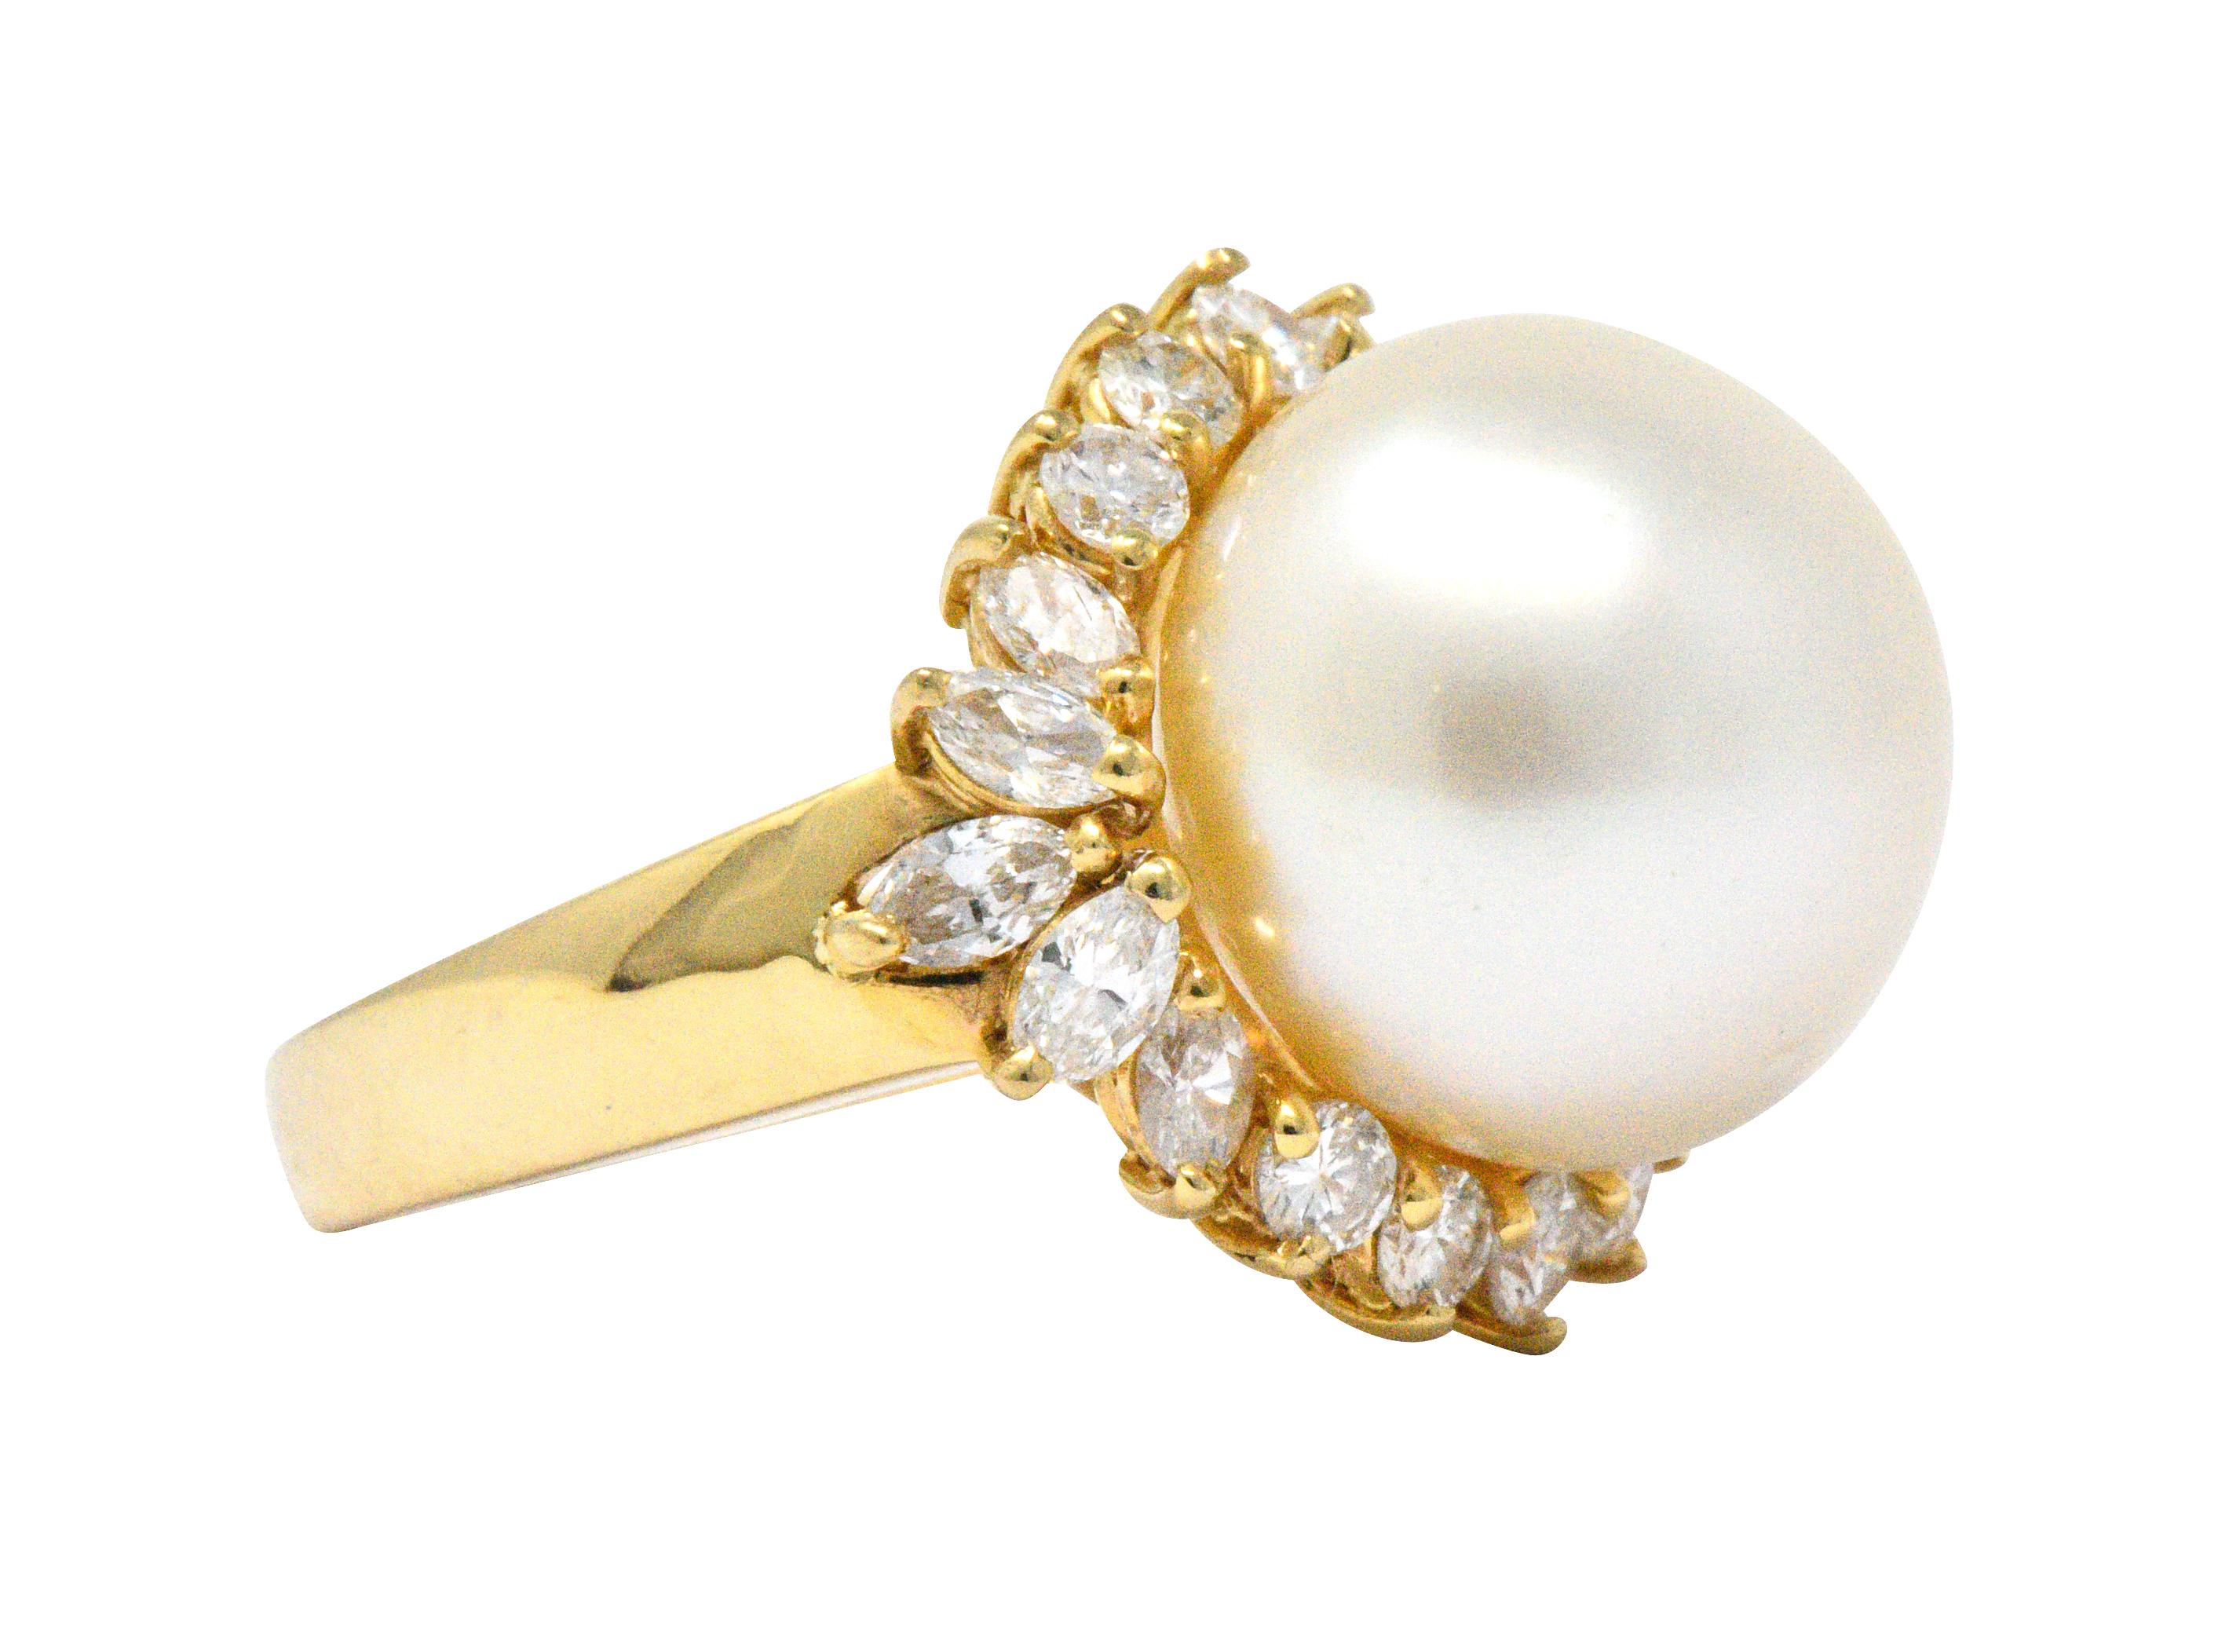 Centering a button shaped cultured South Sea Pearl measuring approximately 14.3 mm, cream body color

Featuring very good luster with slight rose overtones and very good surface quality

Accented by 10 marquise cut diamonds and 10 round brilliant